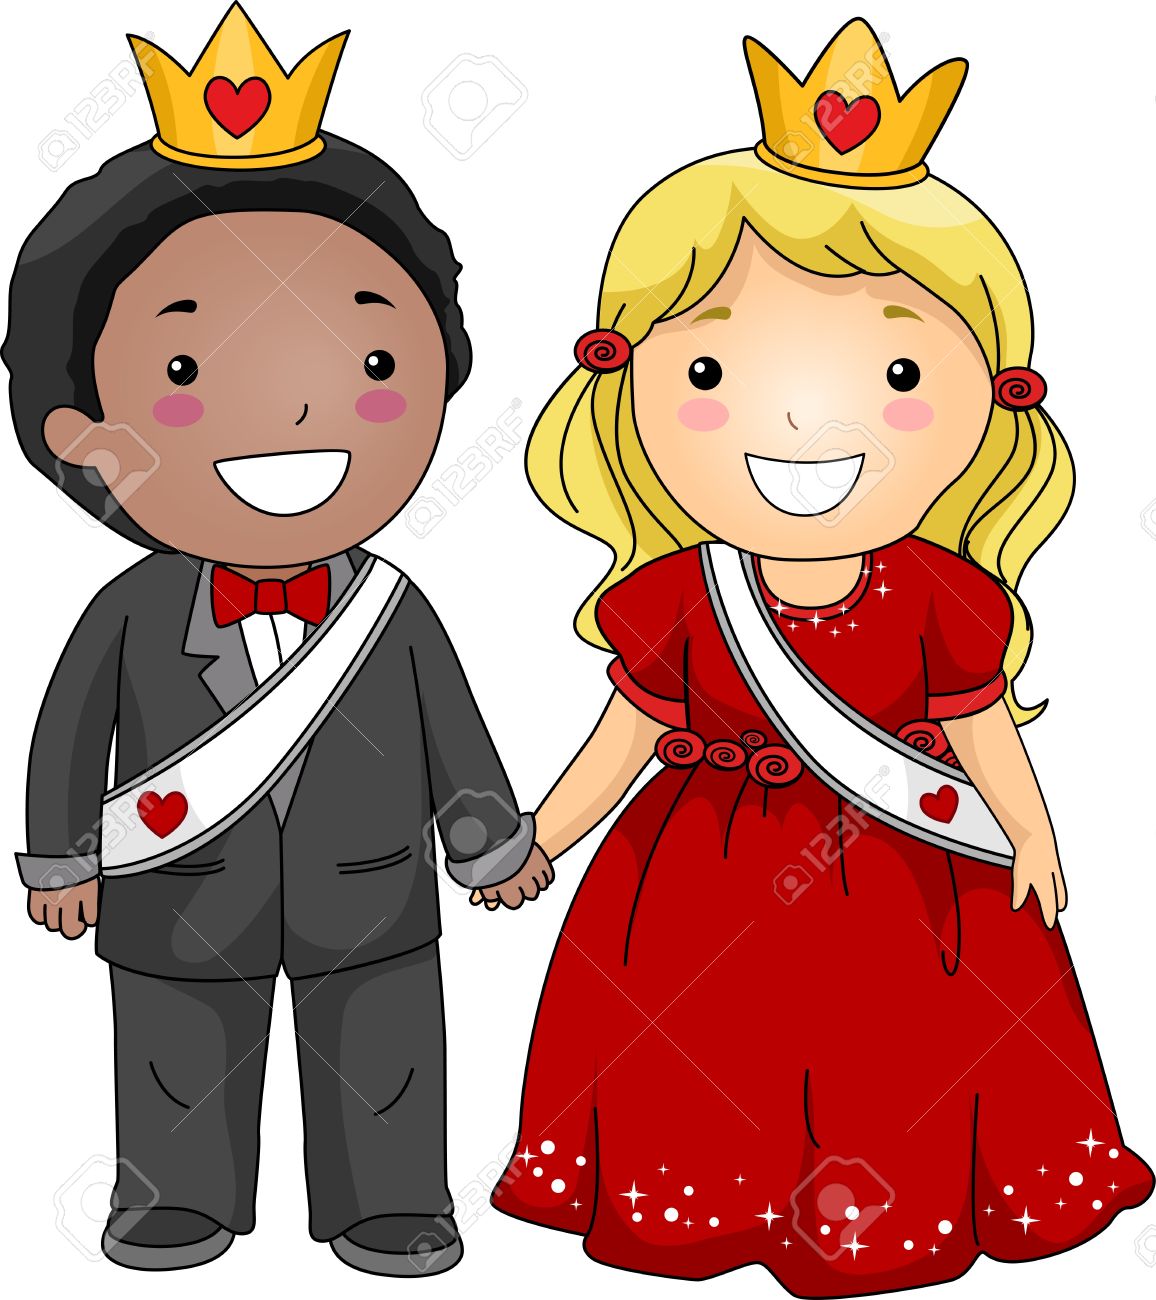 king clipart queenclipart